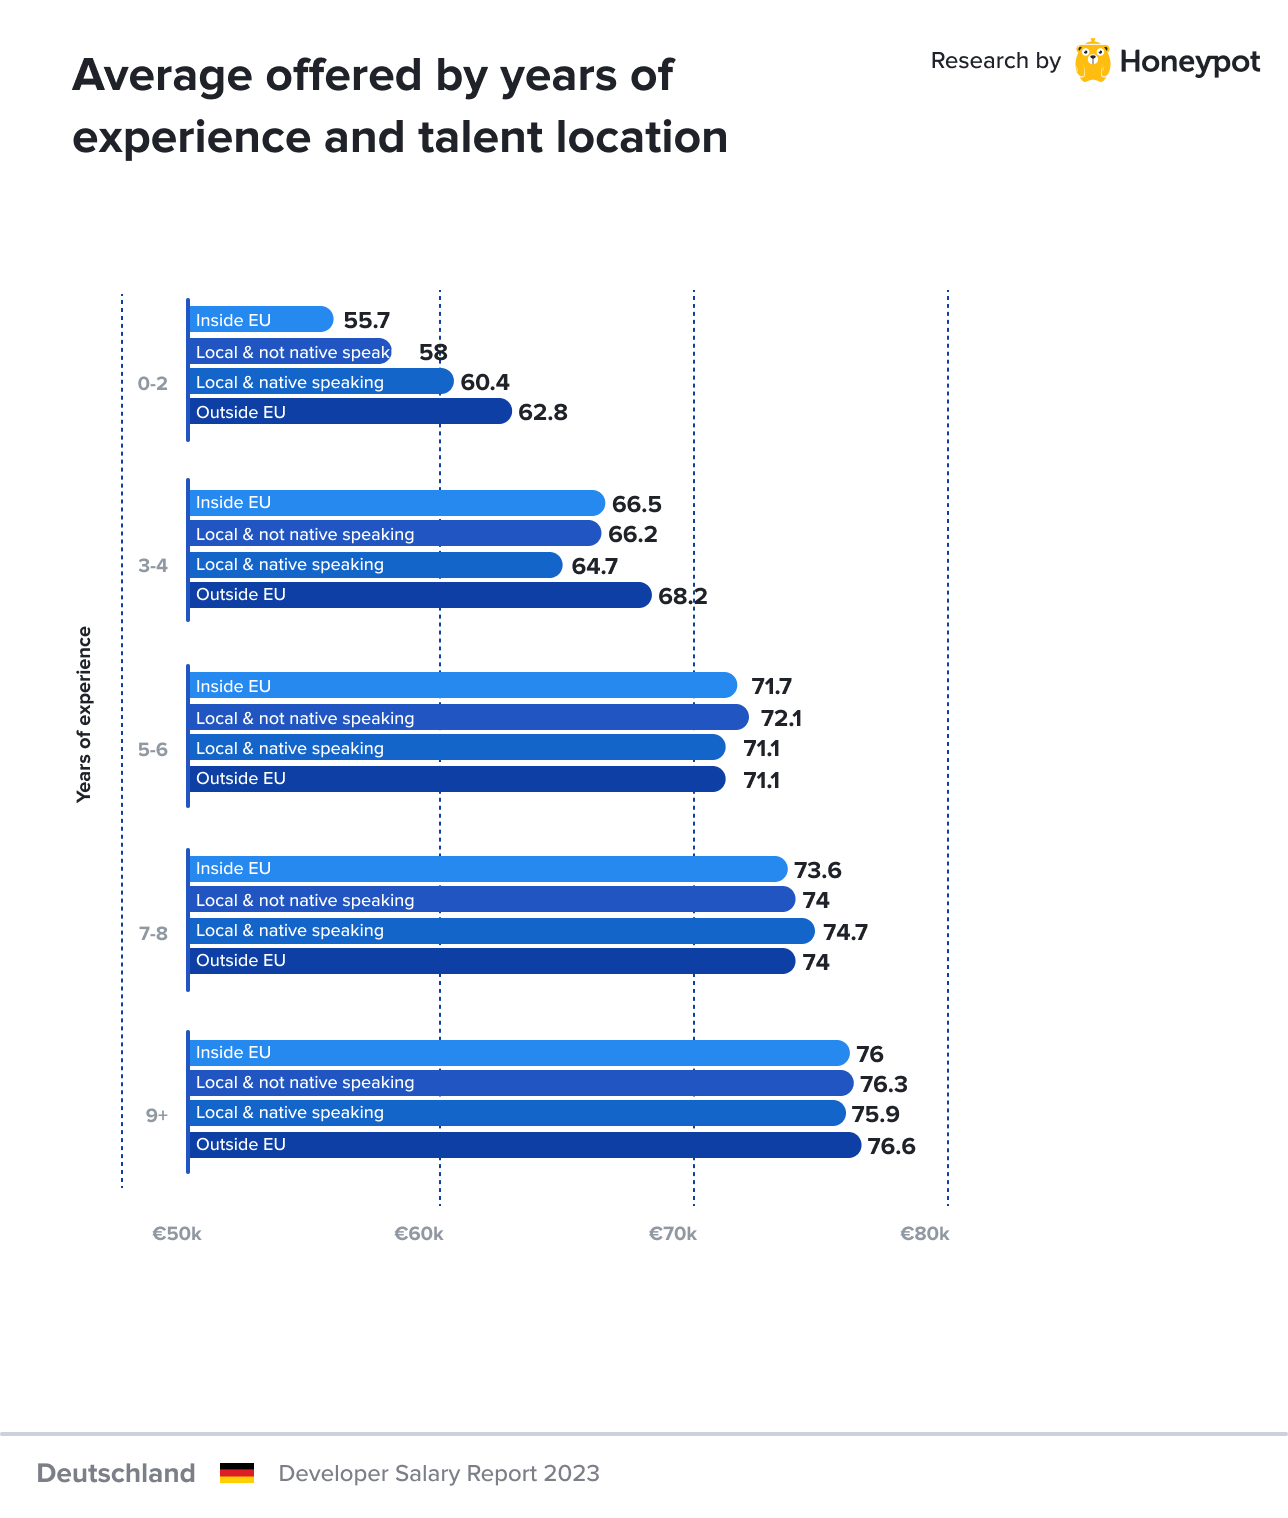 Germany – Average offered by years of exbyience and talent location